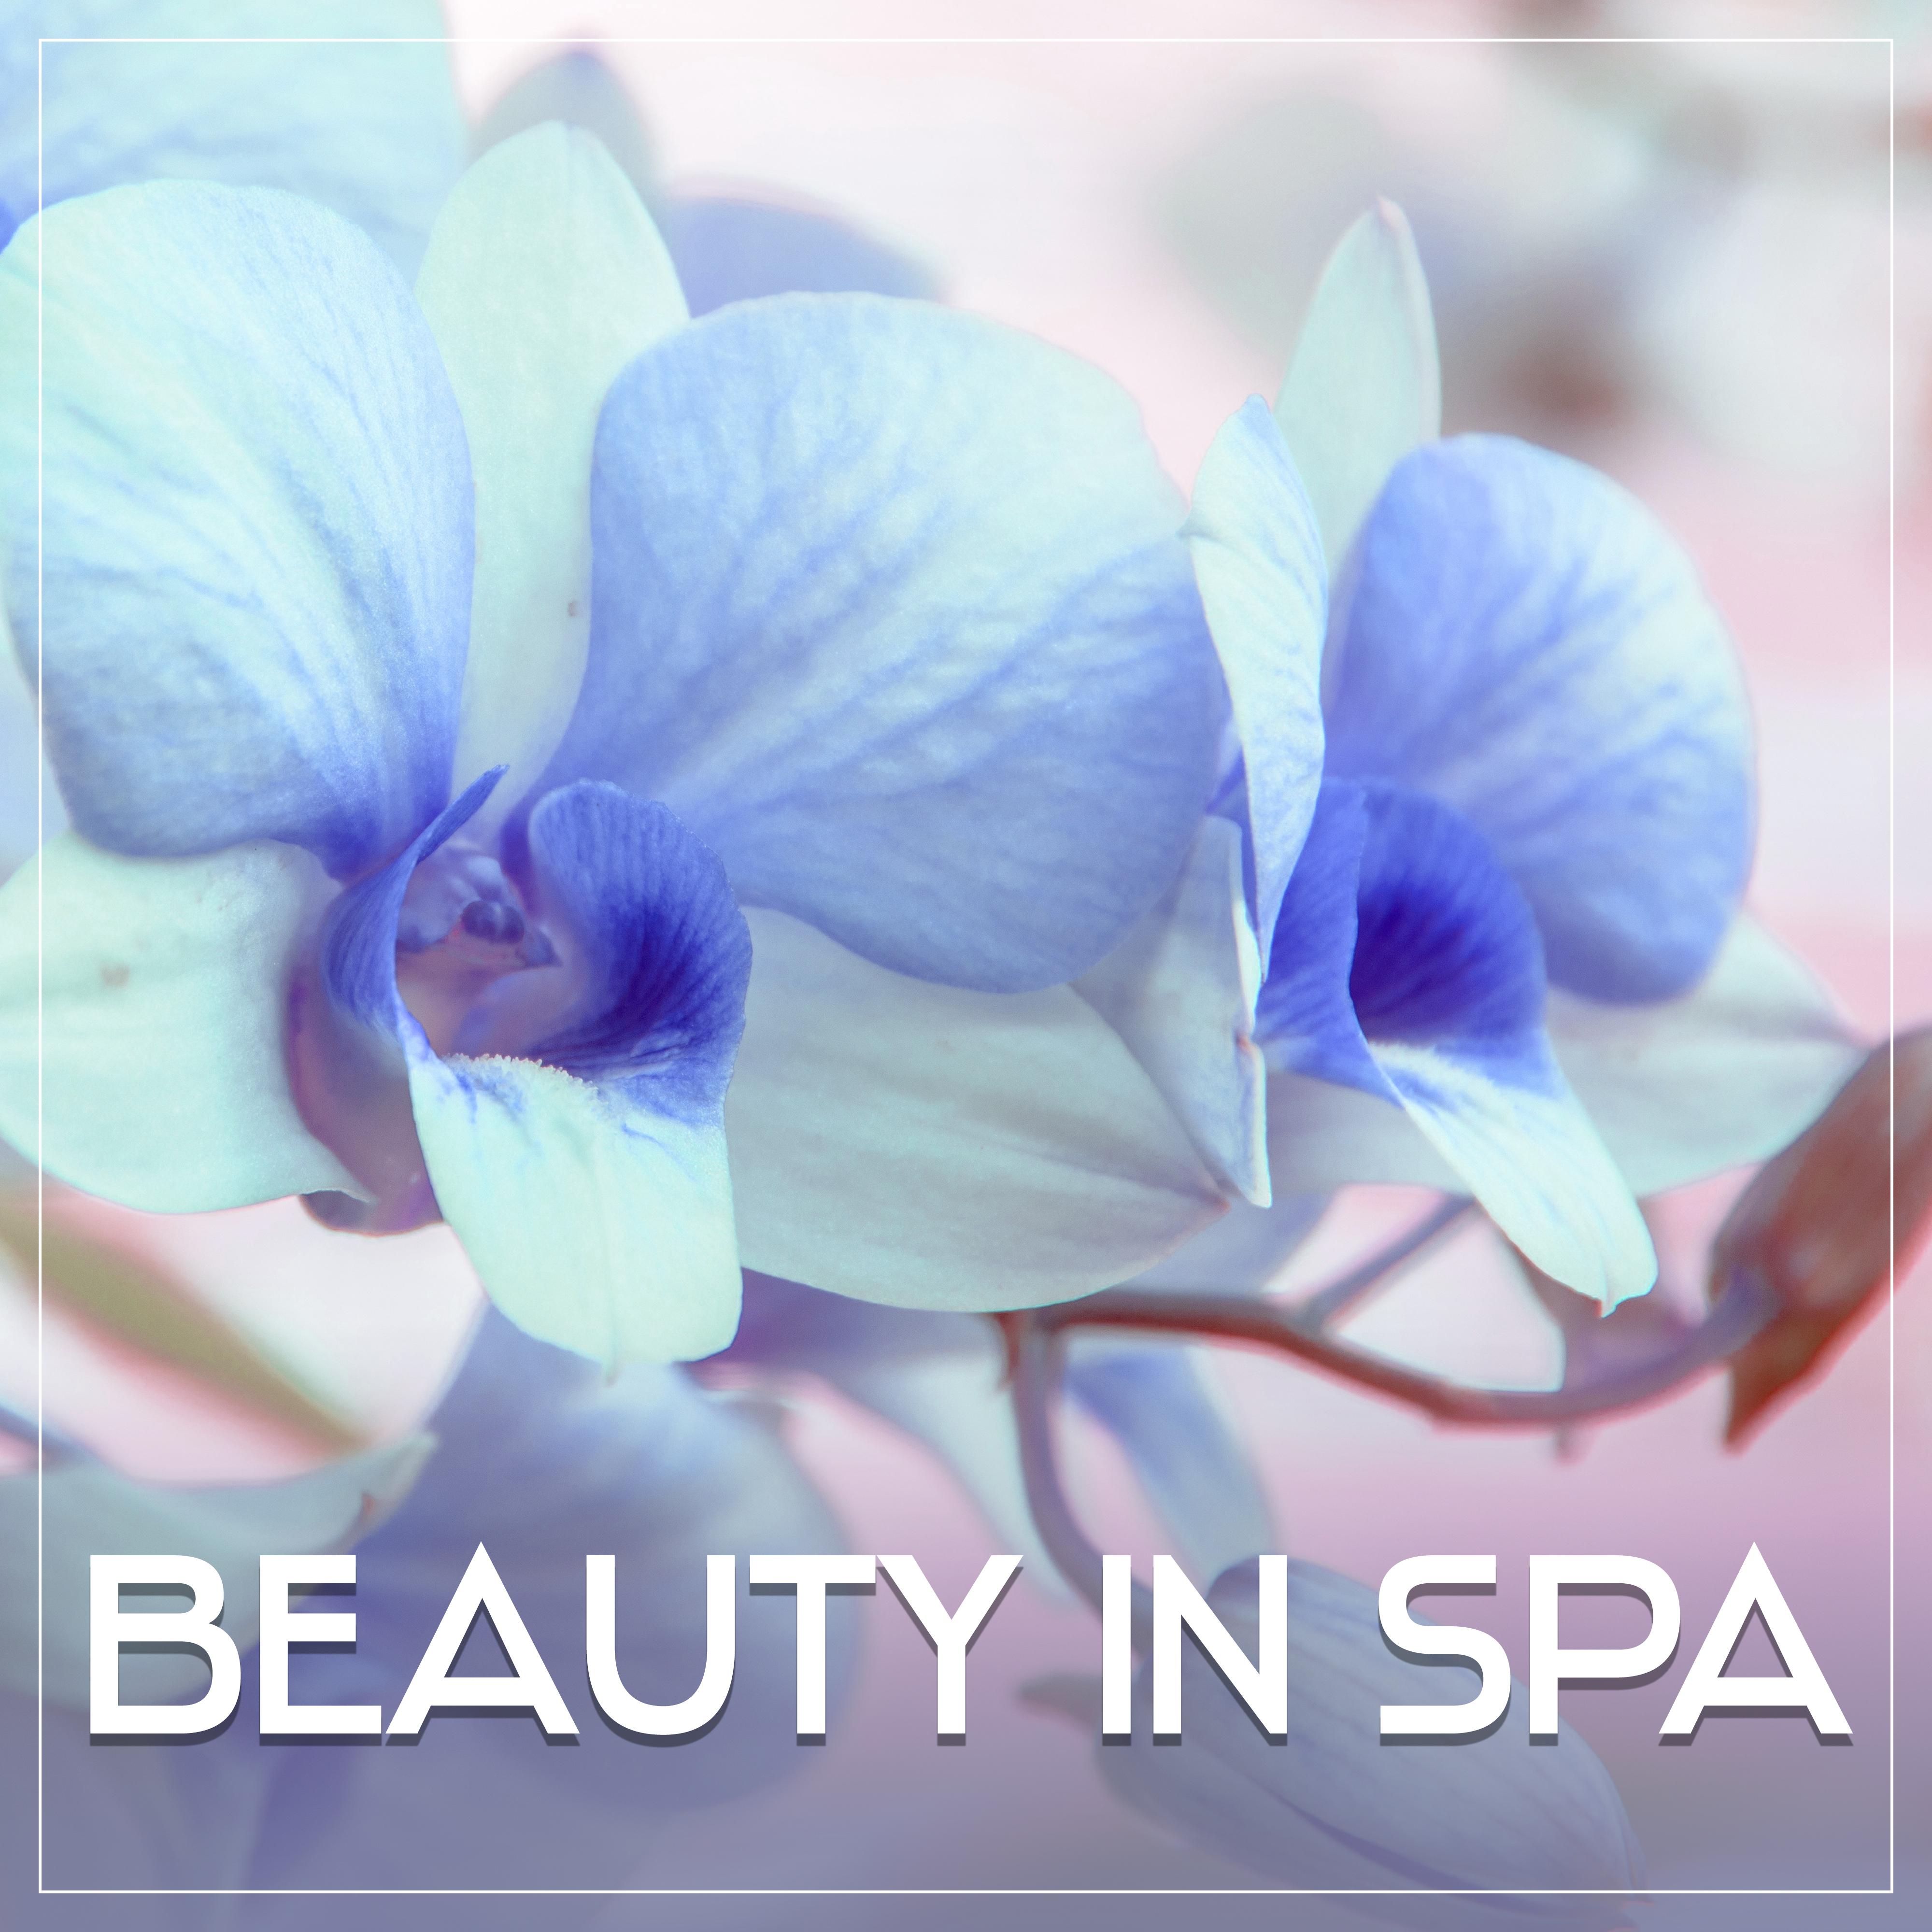 Beauty in Spa – Relaxation Wellness, Stress Relief, Deep Sleep, Soft Music, Nature Sounds for Rest, Spa Music, Peaceful Mind